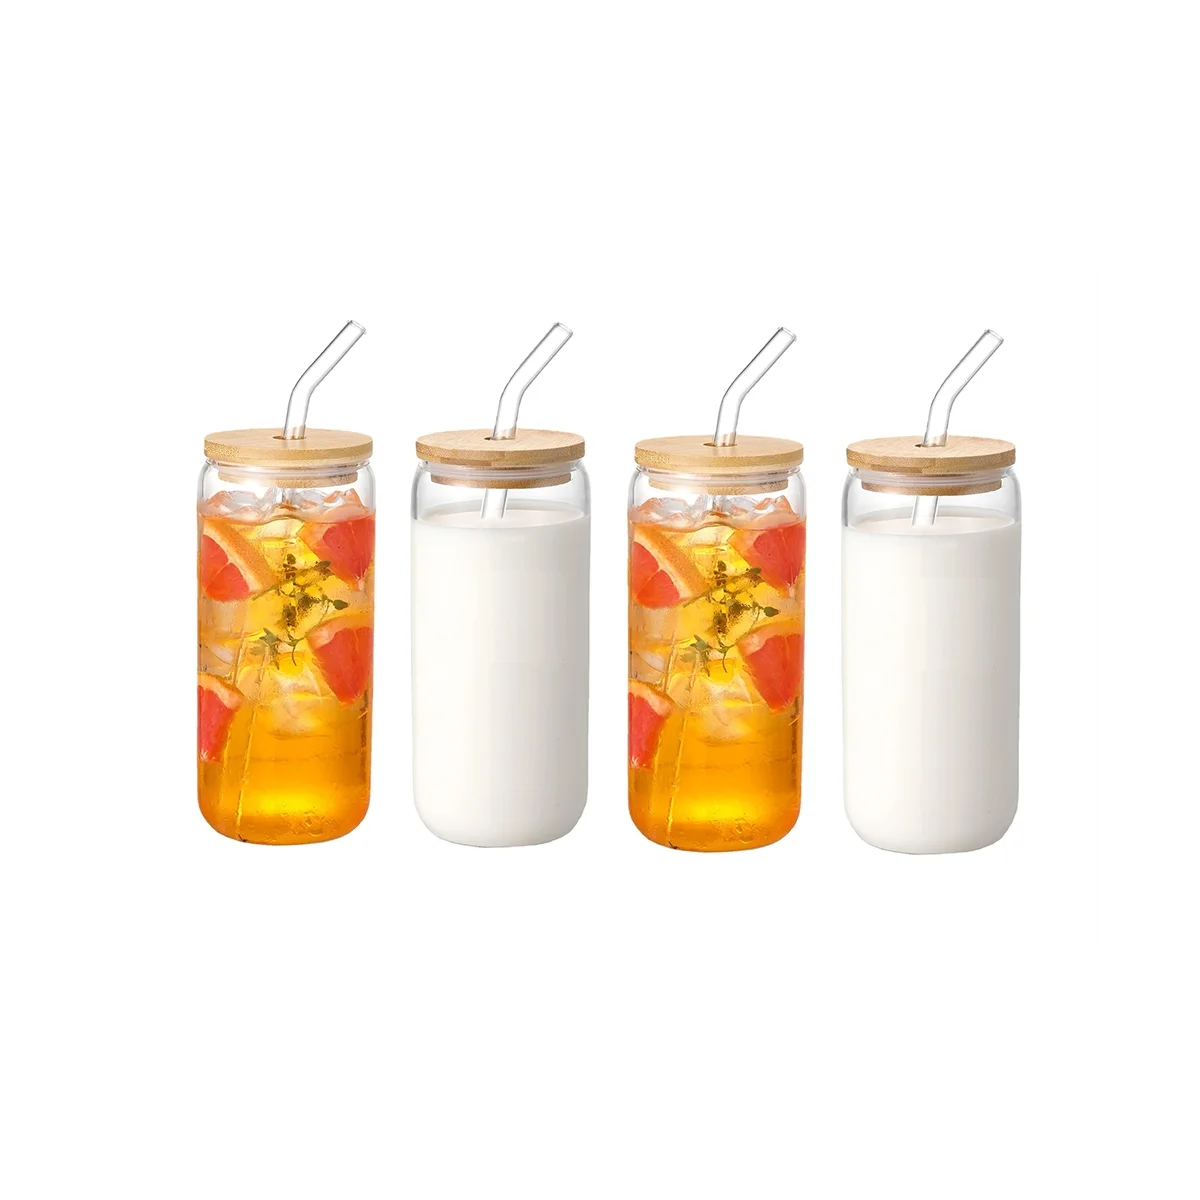 https://ae01.alicdn.com/kf/S21a11e2afb8d402eb1def962fa40b78c9/20Oz-Clear-Frosted-Sublimation-Blanks-Glass-Mason-Jar-Beer-Can-Glass-Cup-with-Bamboo-Lid.jpg